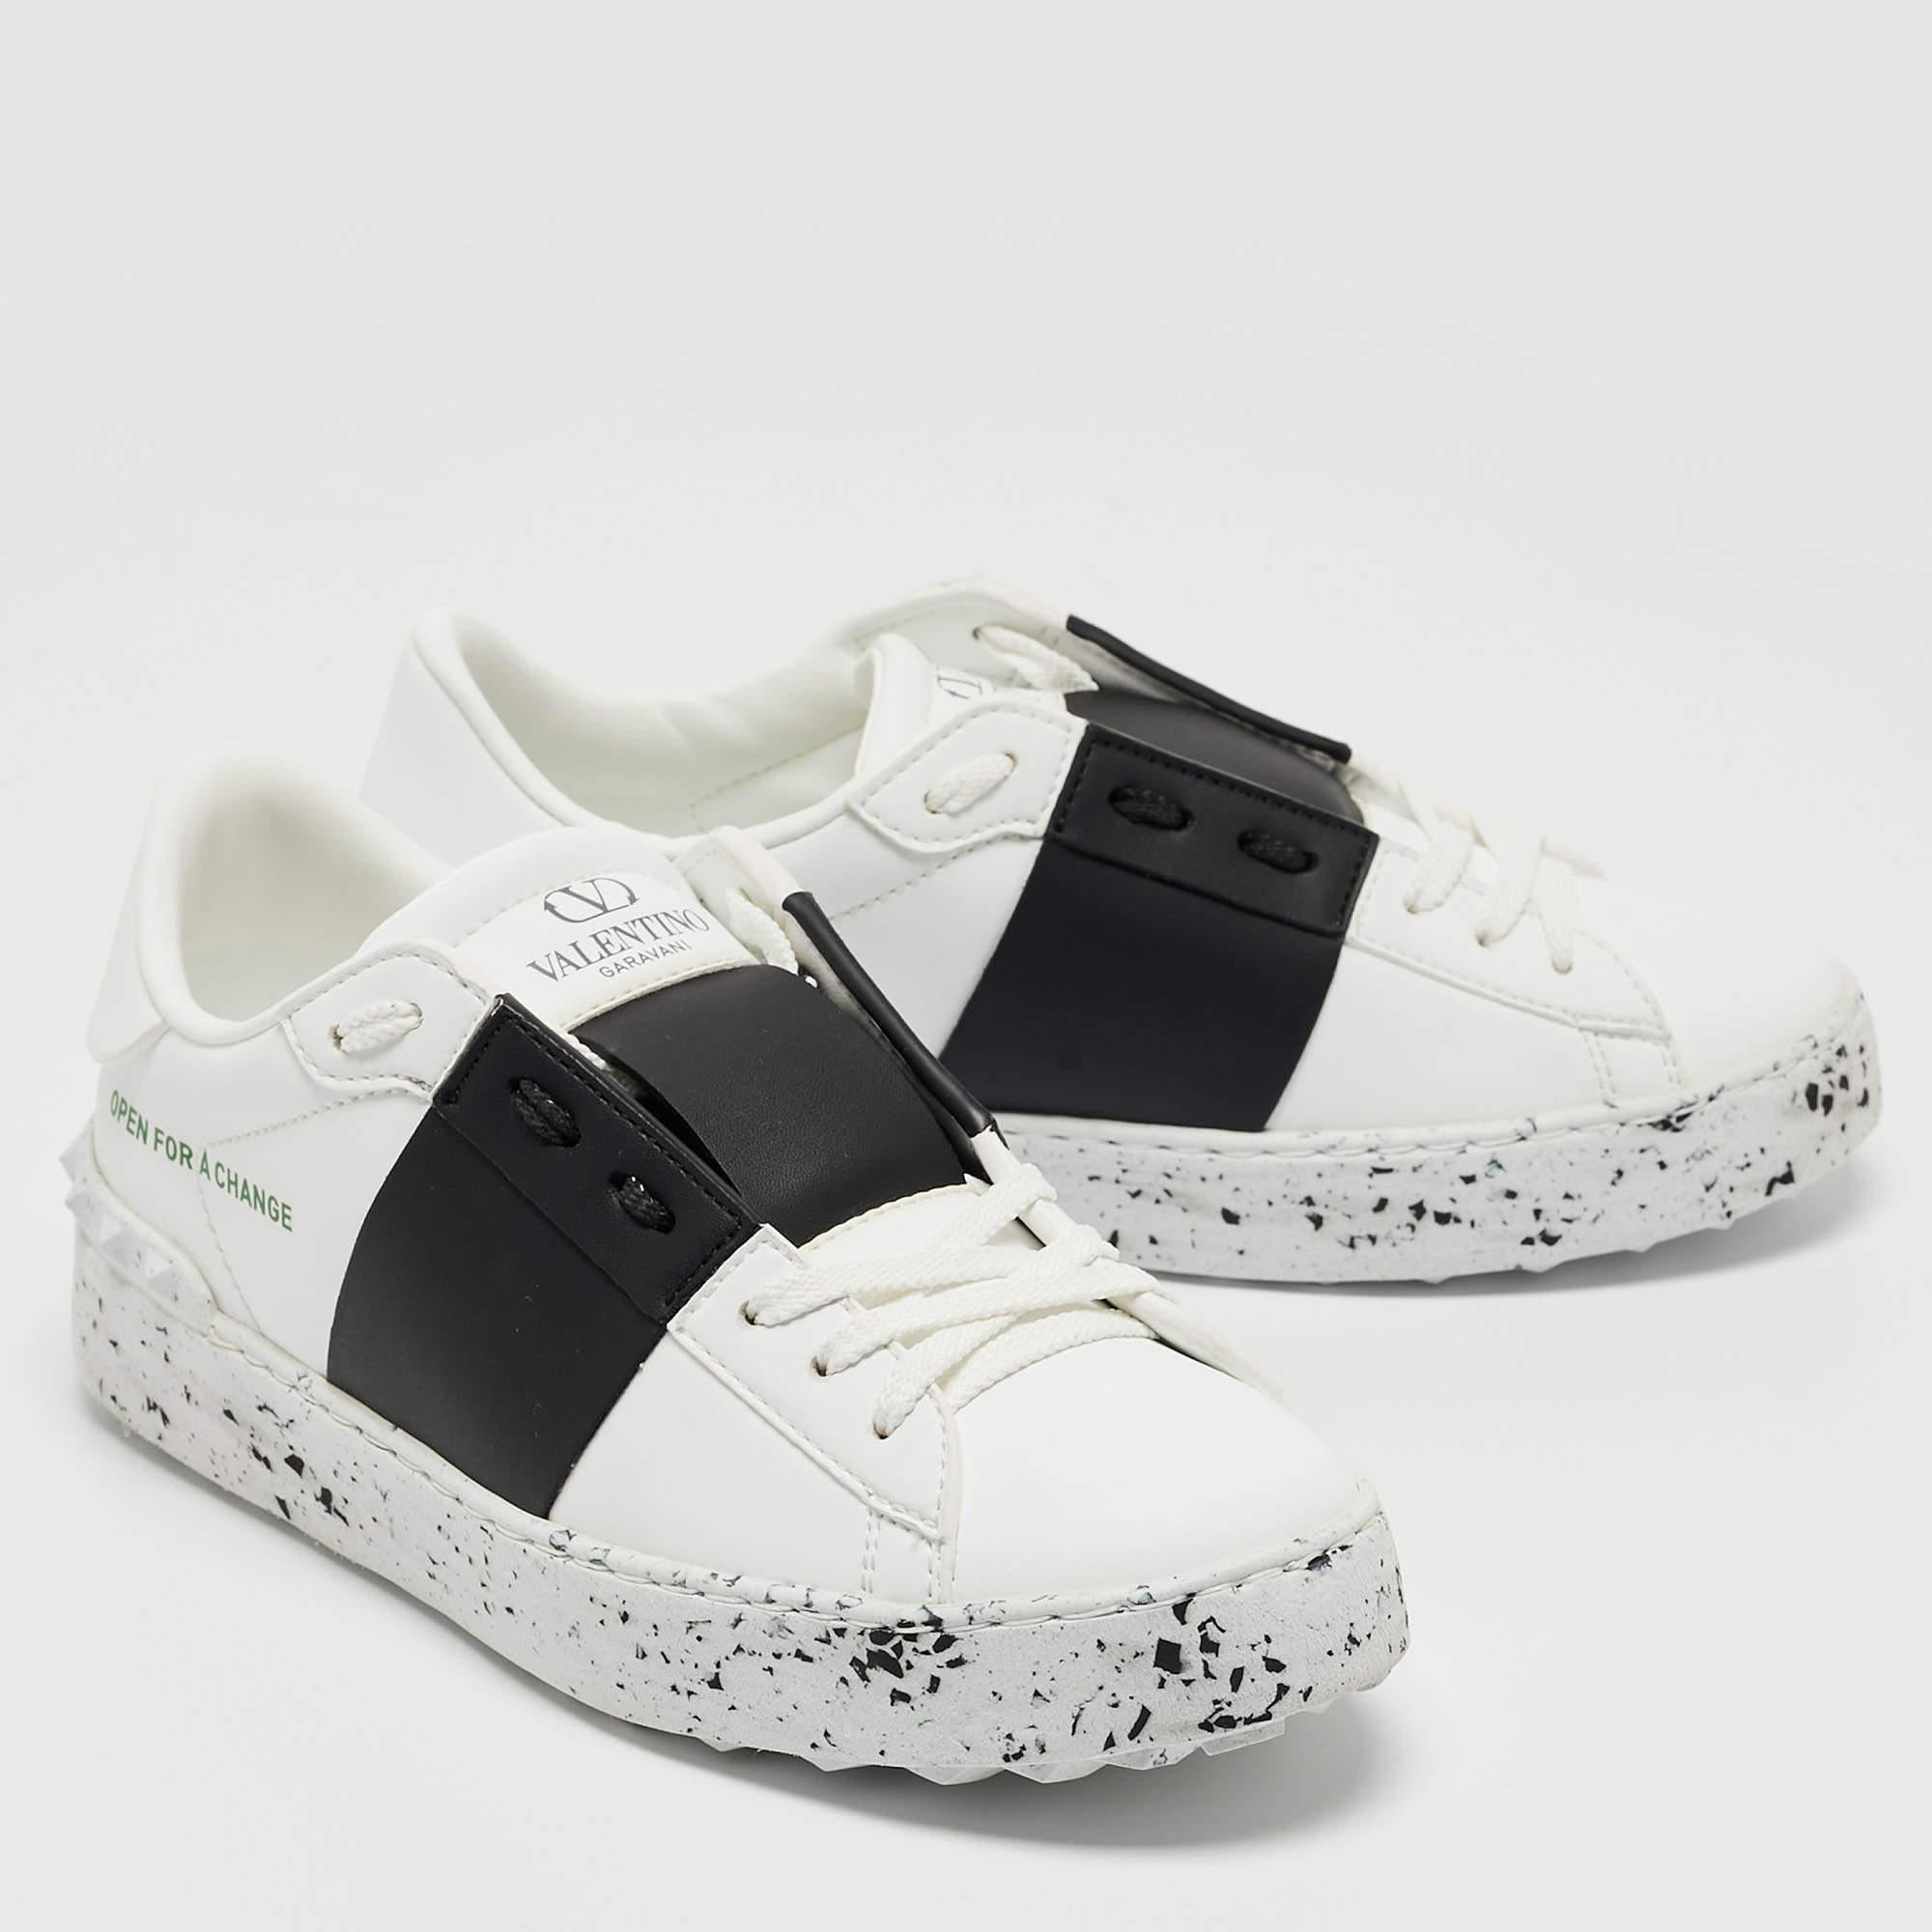 Upgrade your style with these Valentino white sneakers. Meticulously designed for fashion and comfort, they're the ideal choice for a trendy and comfortable stride.

